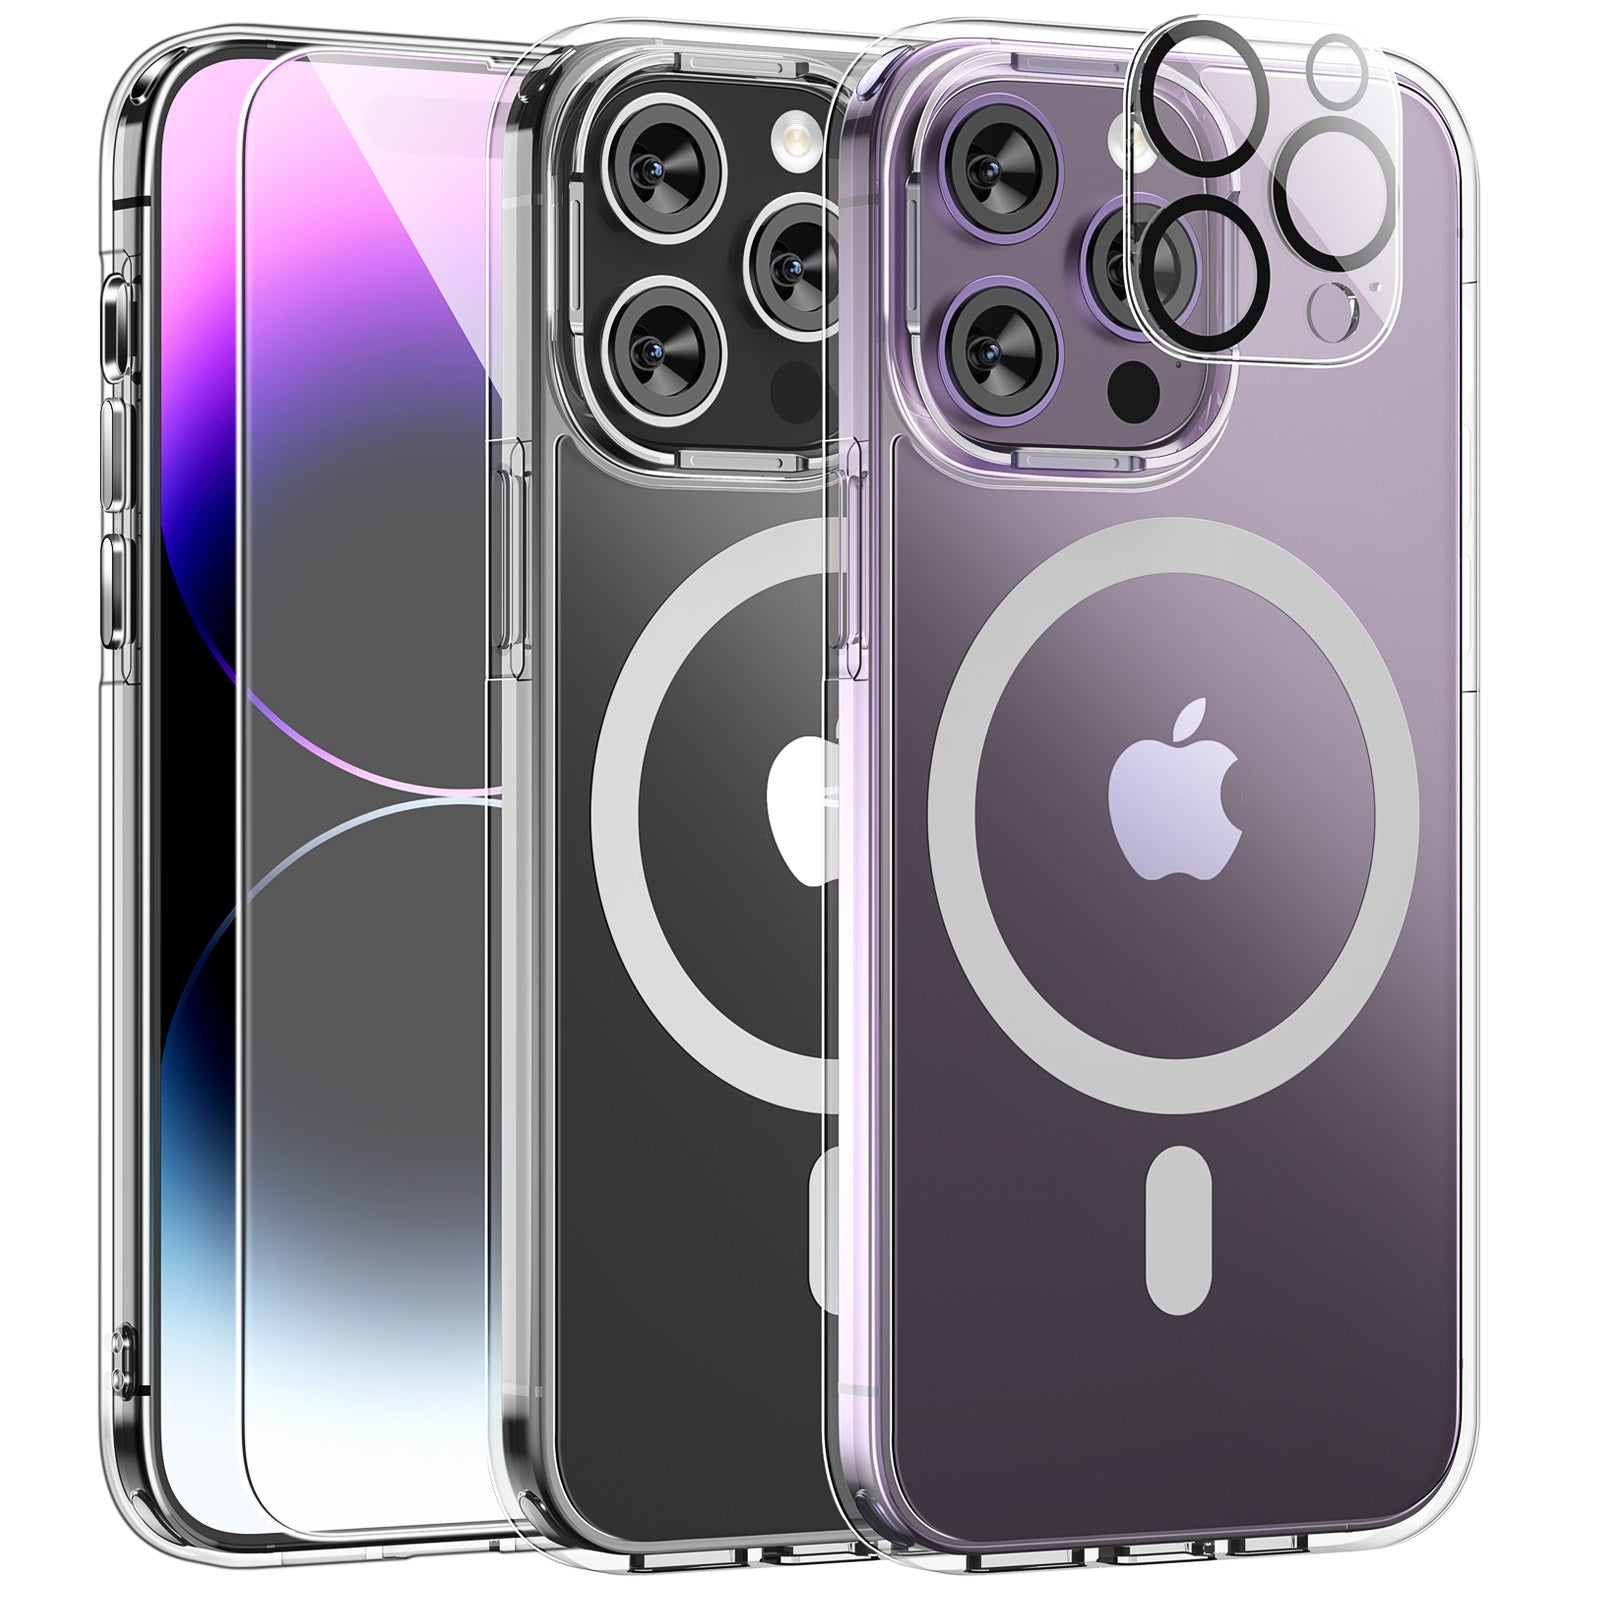 Magnetic Thin Phone Case for iPhone 11/11 Pro/11 Pro Max